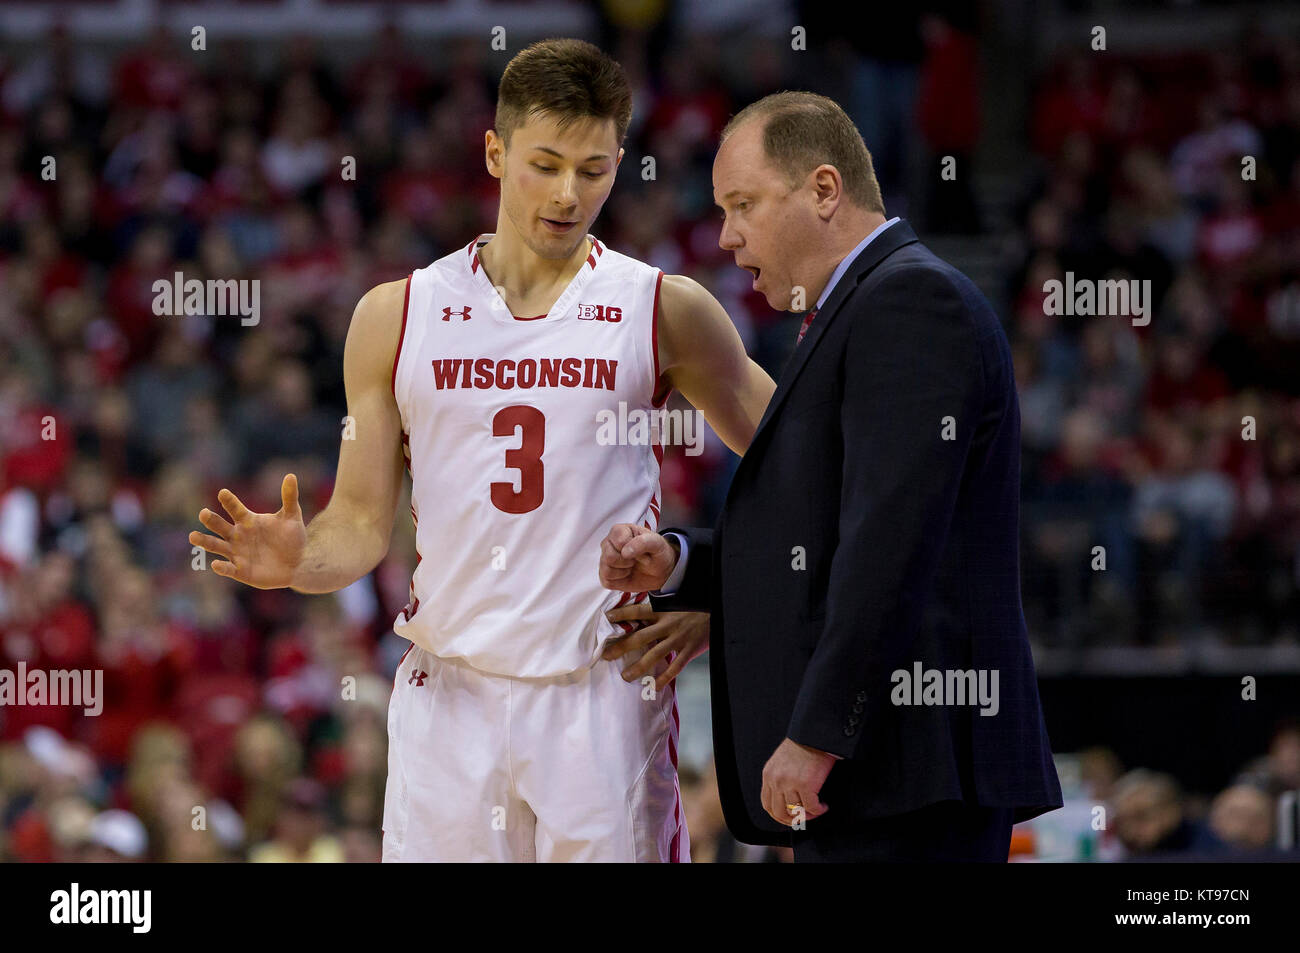 Madison, WI, USA. 23rd Dec, 2017. Wisconsin Badgers guard Walt McGrory #3 talks with Wisconsin coach Greg Gard during the NCAA Basketball game between the Green Bay Phoenix and the Wisconsin Badgers at the Kohl Center in Madison, WI. Wisconsin defeated Green Bay 81-60. John Fisher/CSM/Alamy Live News Stock Photo